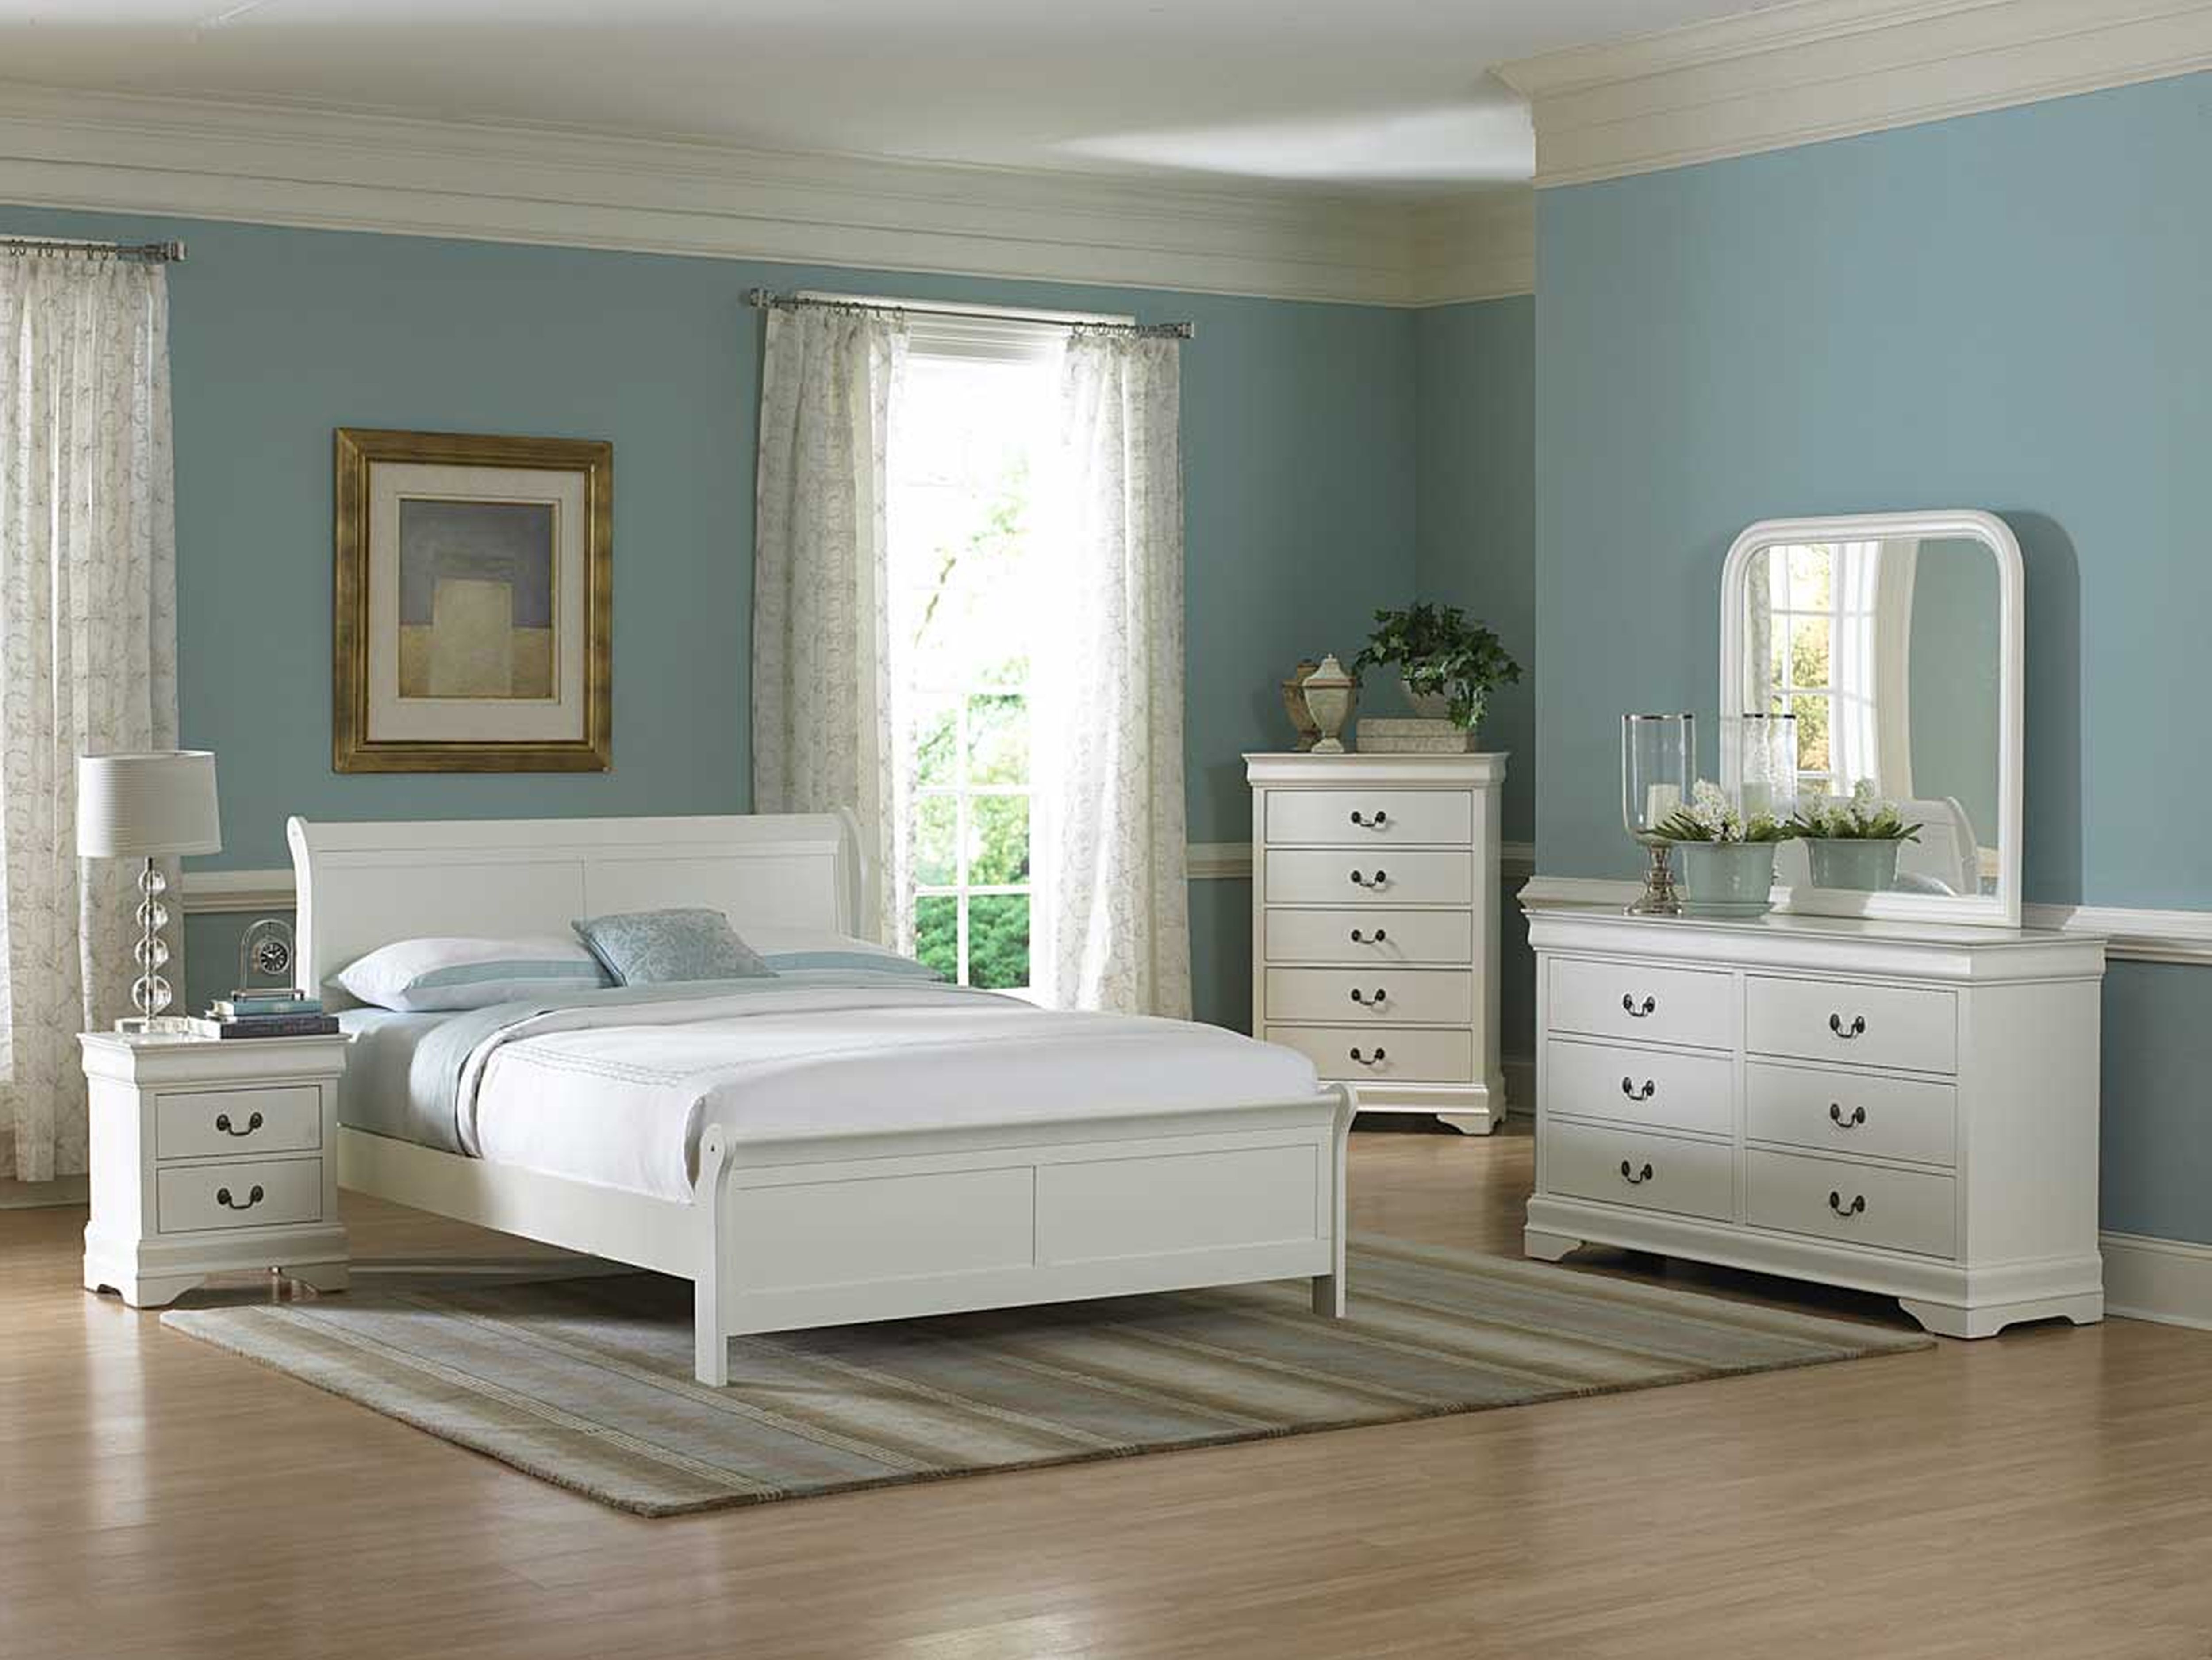 room ideas with white furniture photo - 6